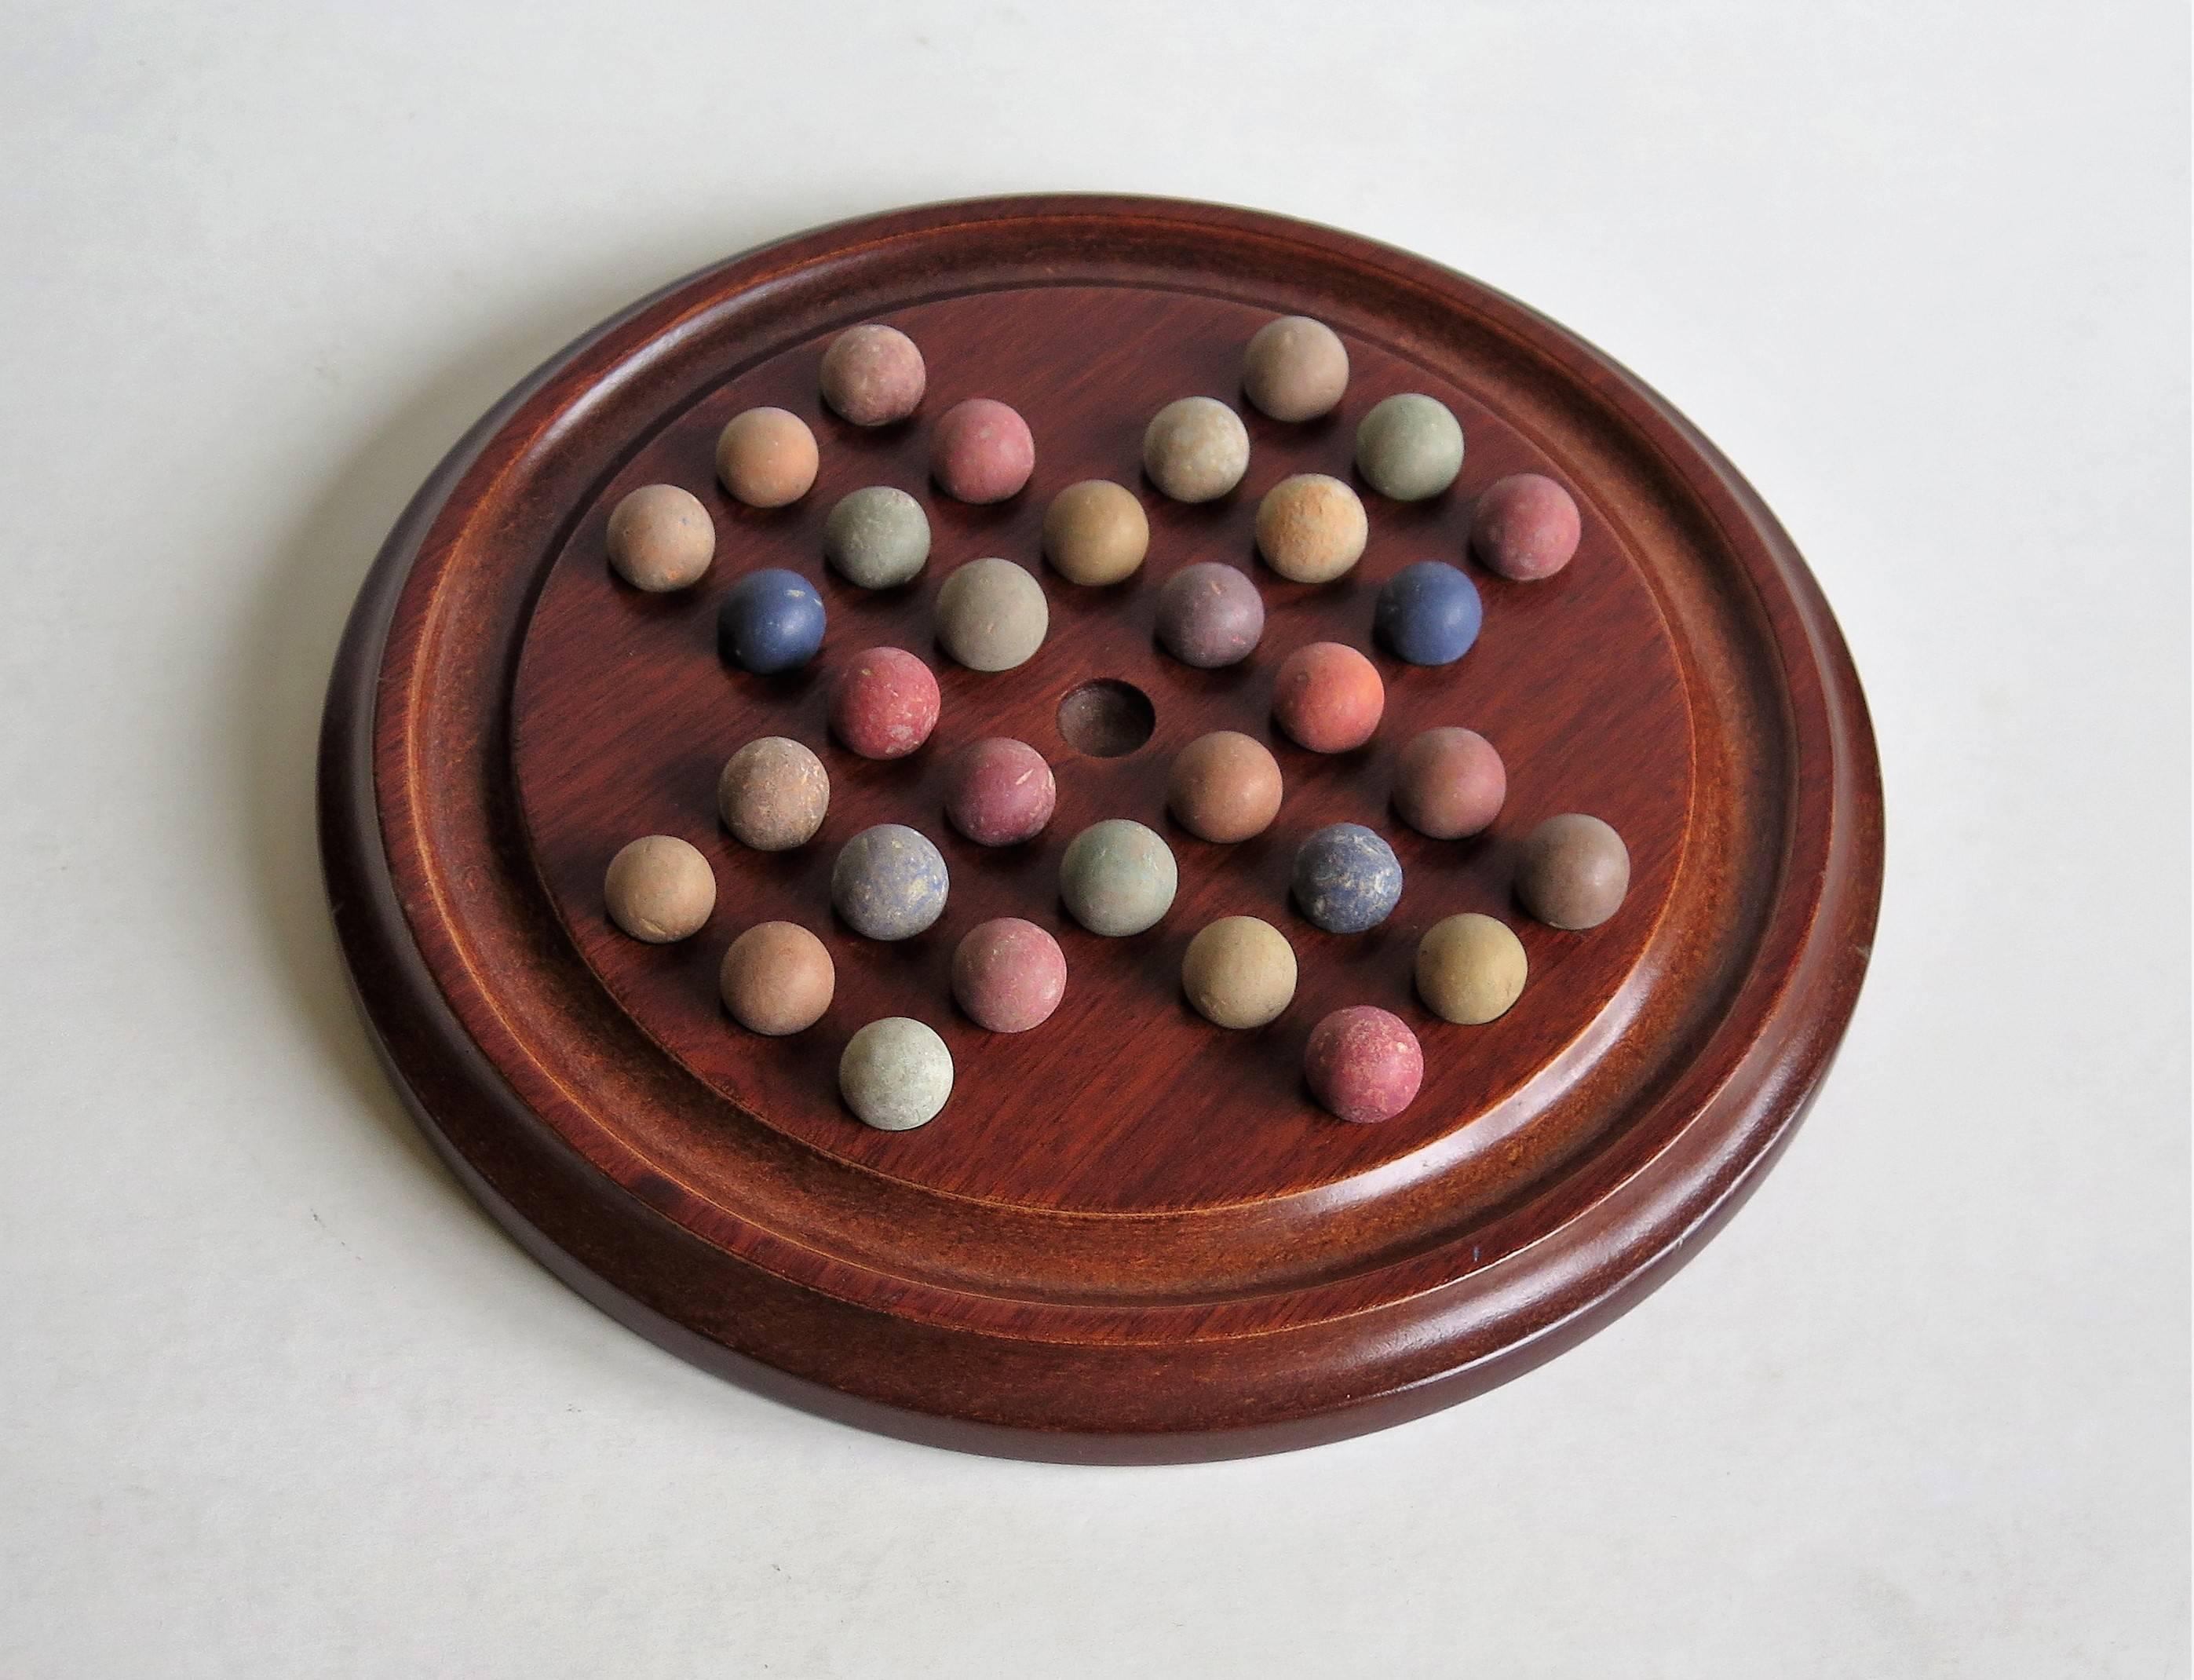 Victorian 19th Century Marble Solitaire Board Game with 32 Early Handmade Marbles, Ca 1880